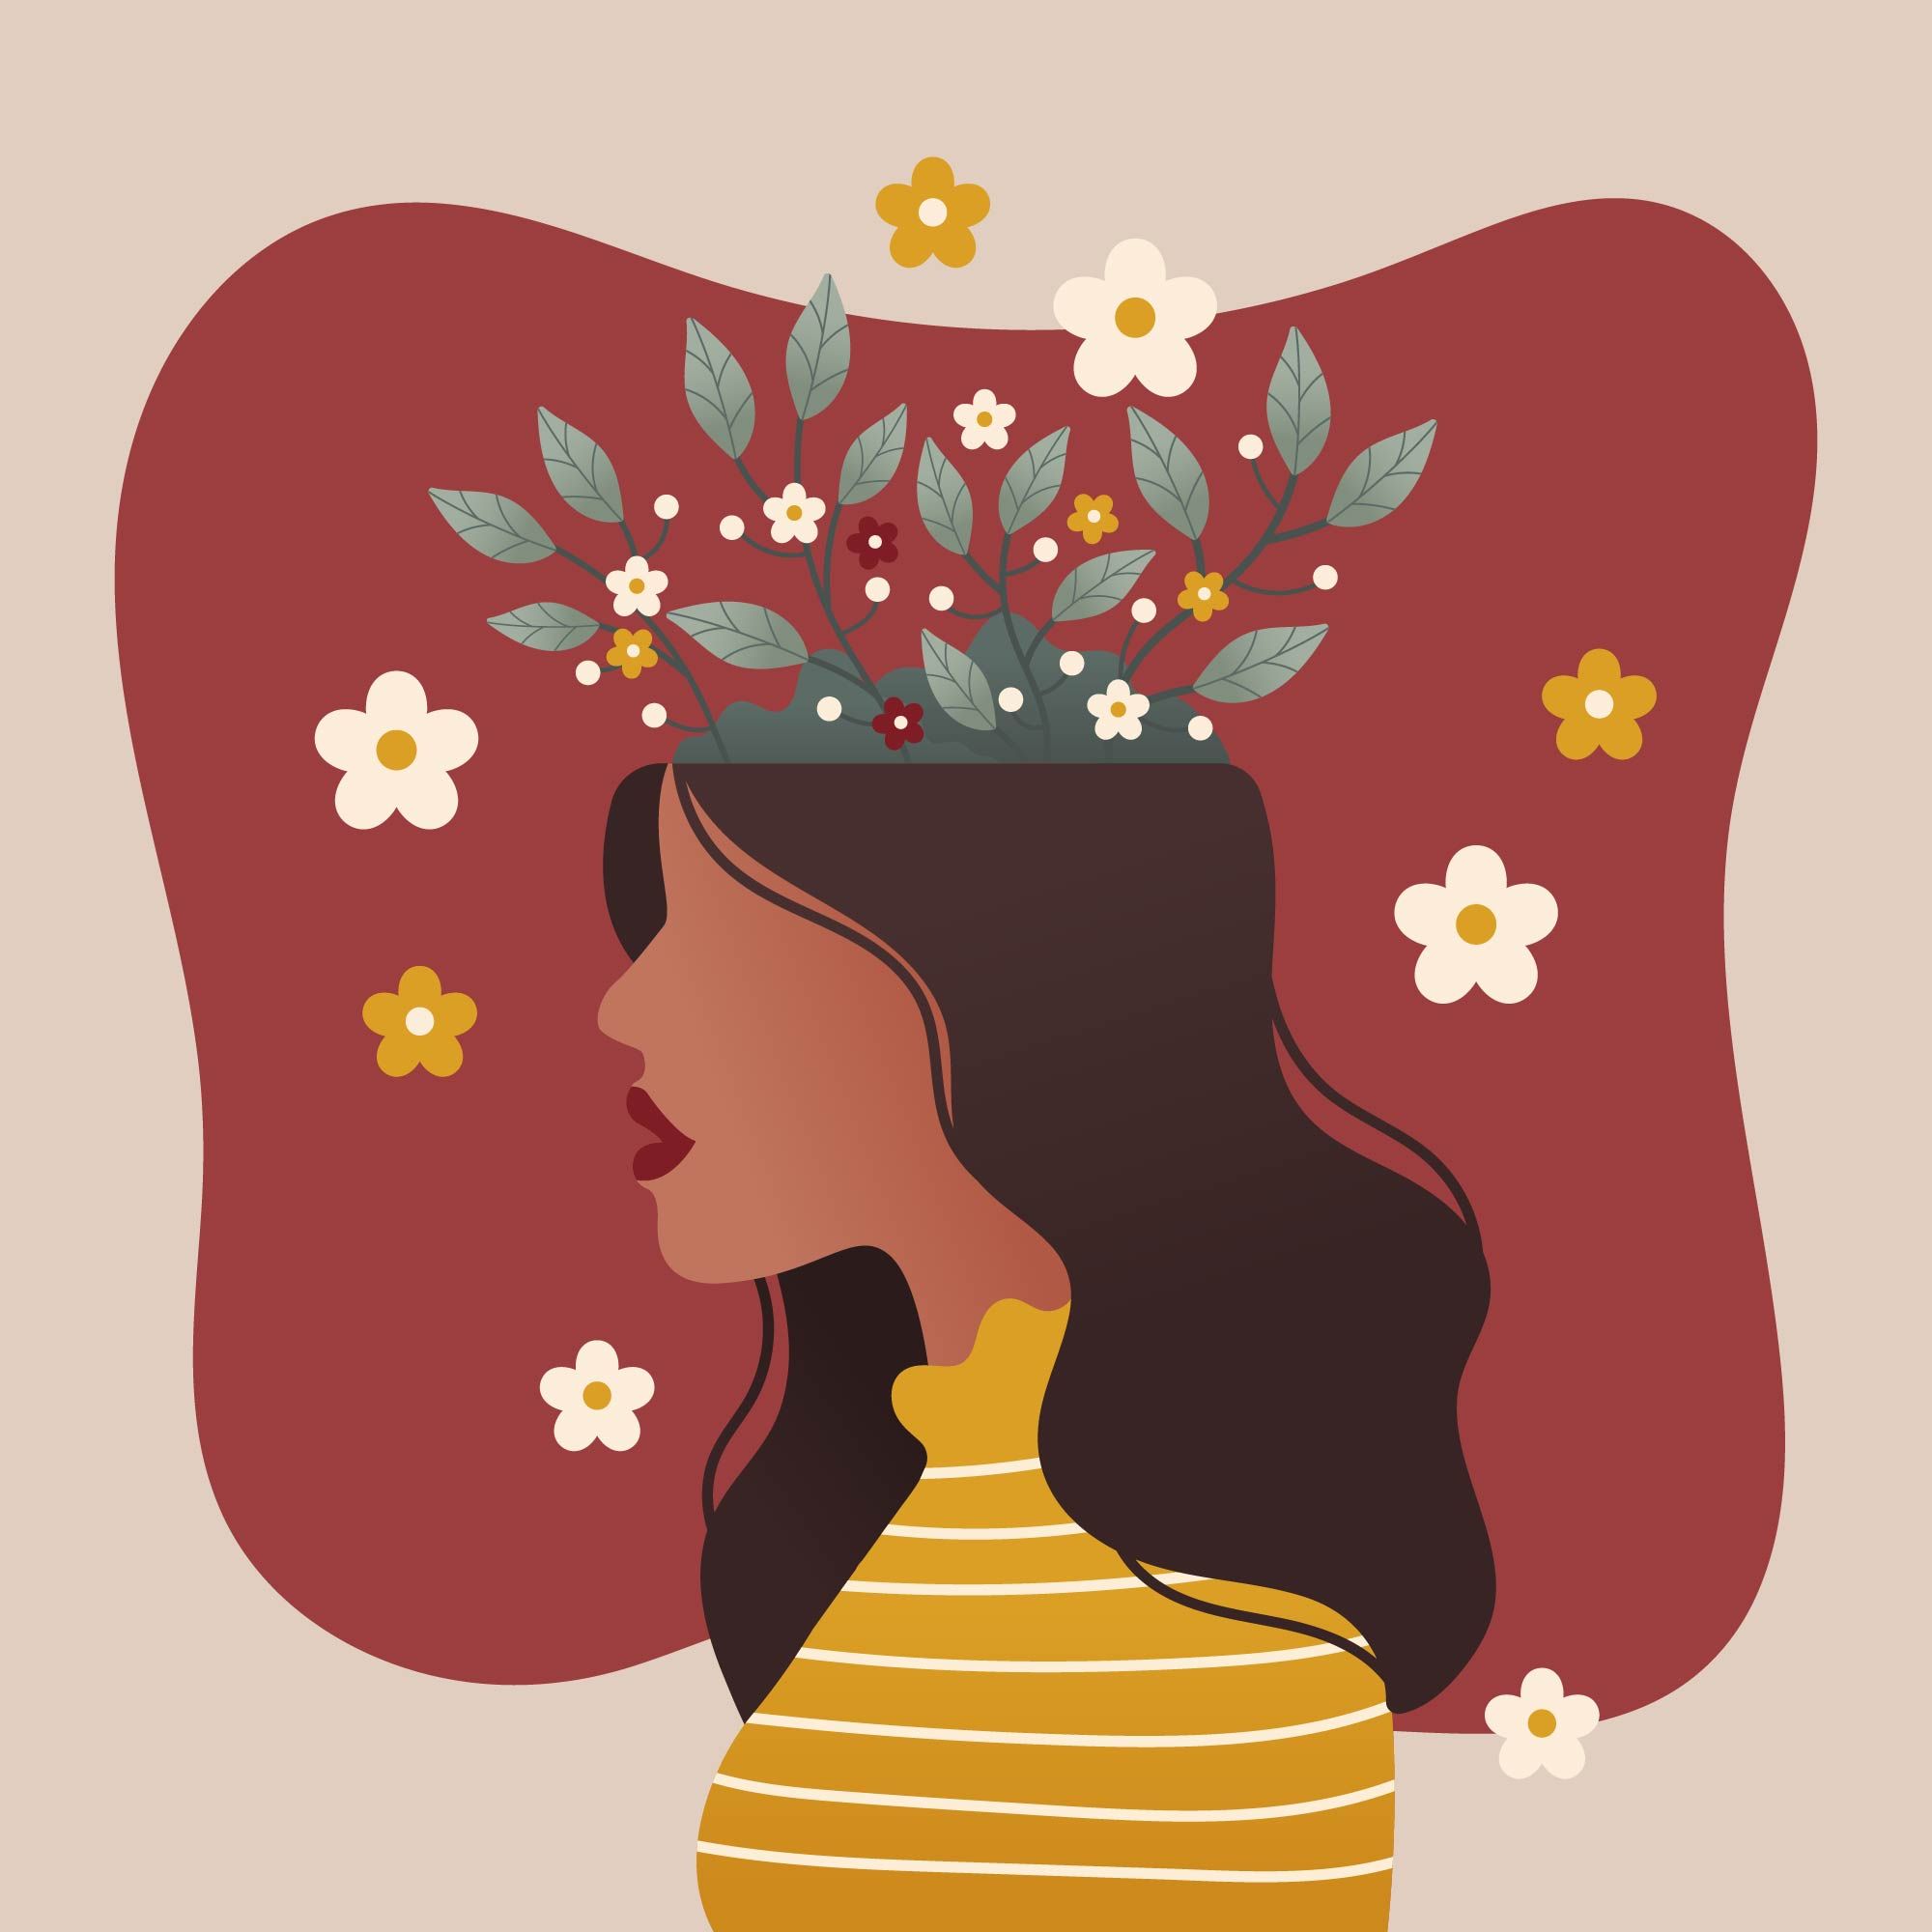 A wonderful clipart representing mental health, where flowers bloom in the head.